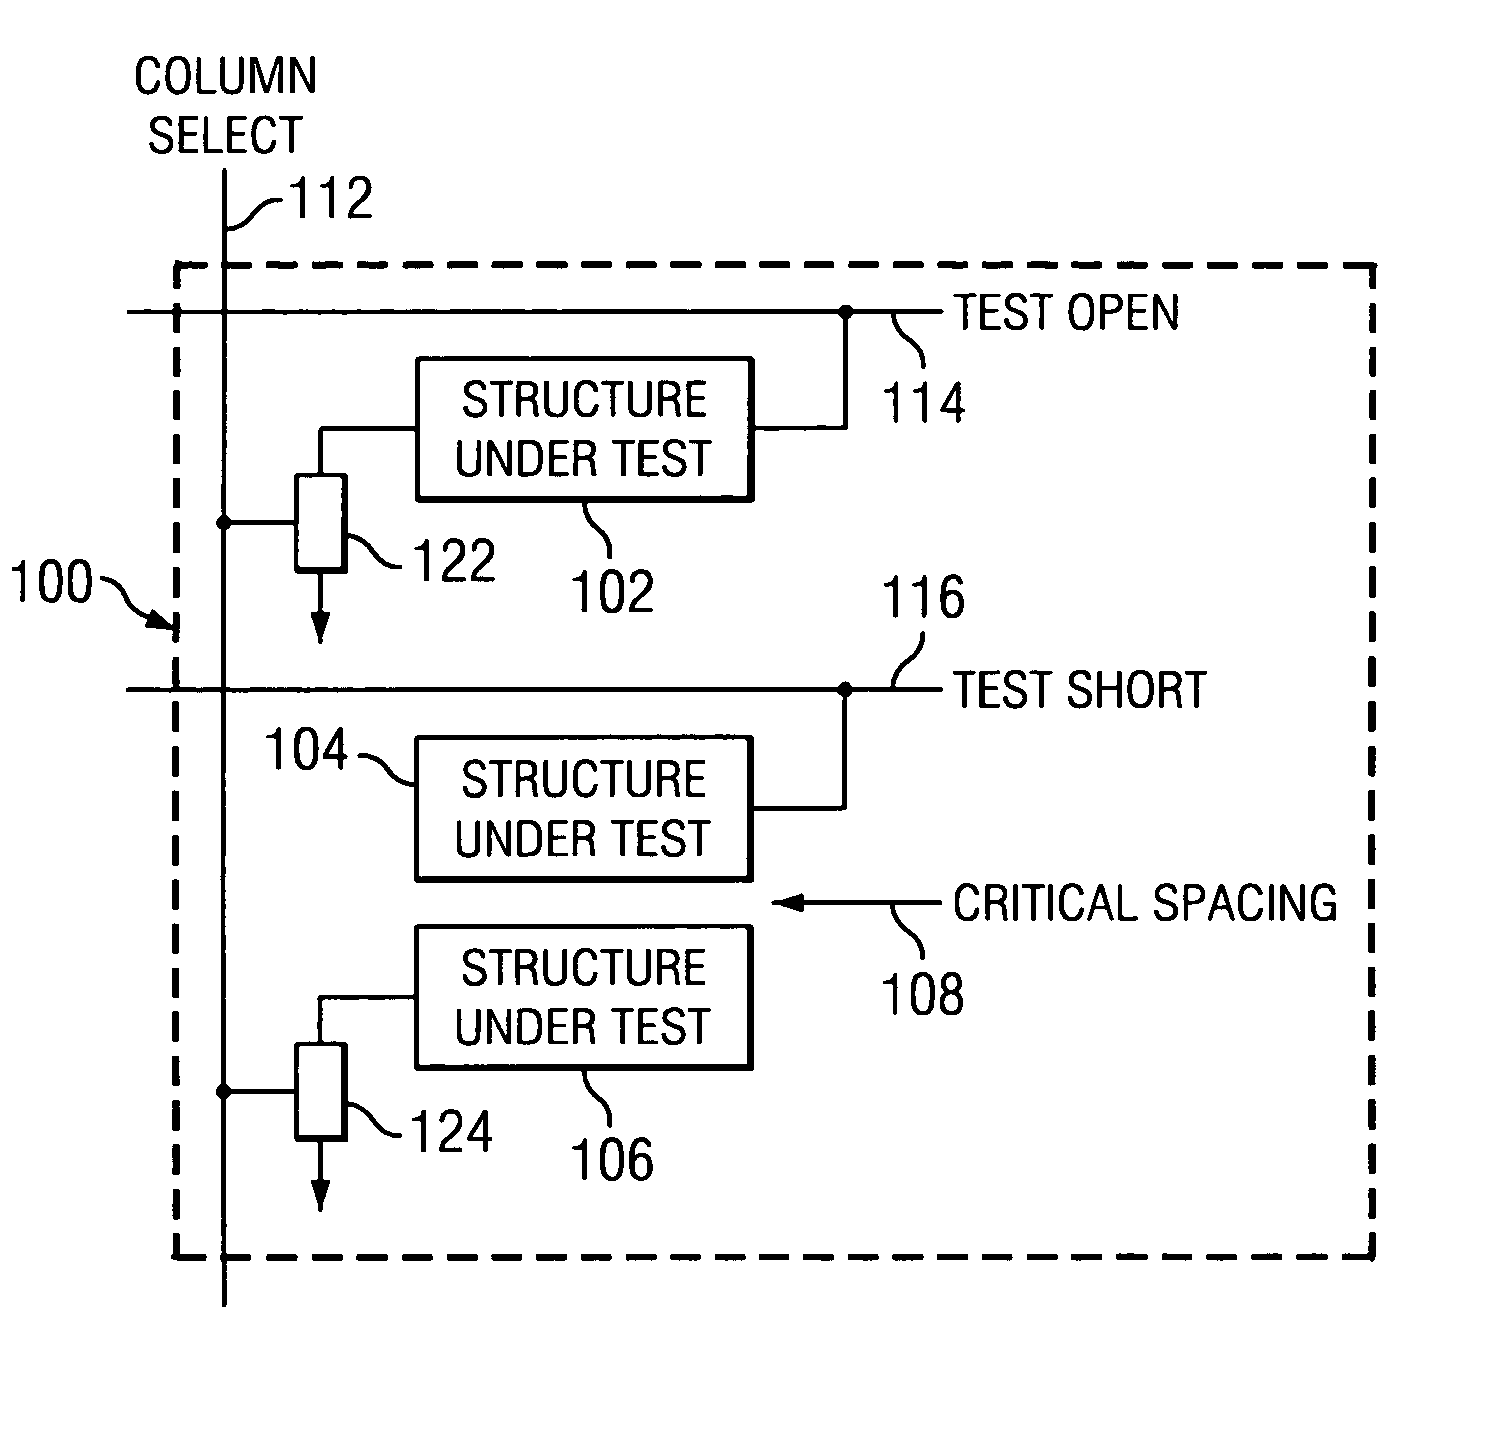 Defect monitor for semiconductor manufacturing capable of performing analog resistance measurements